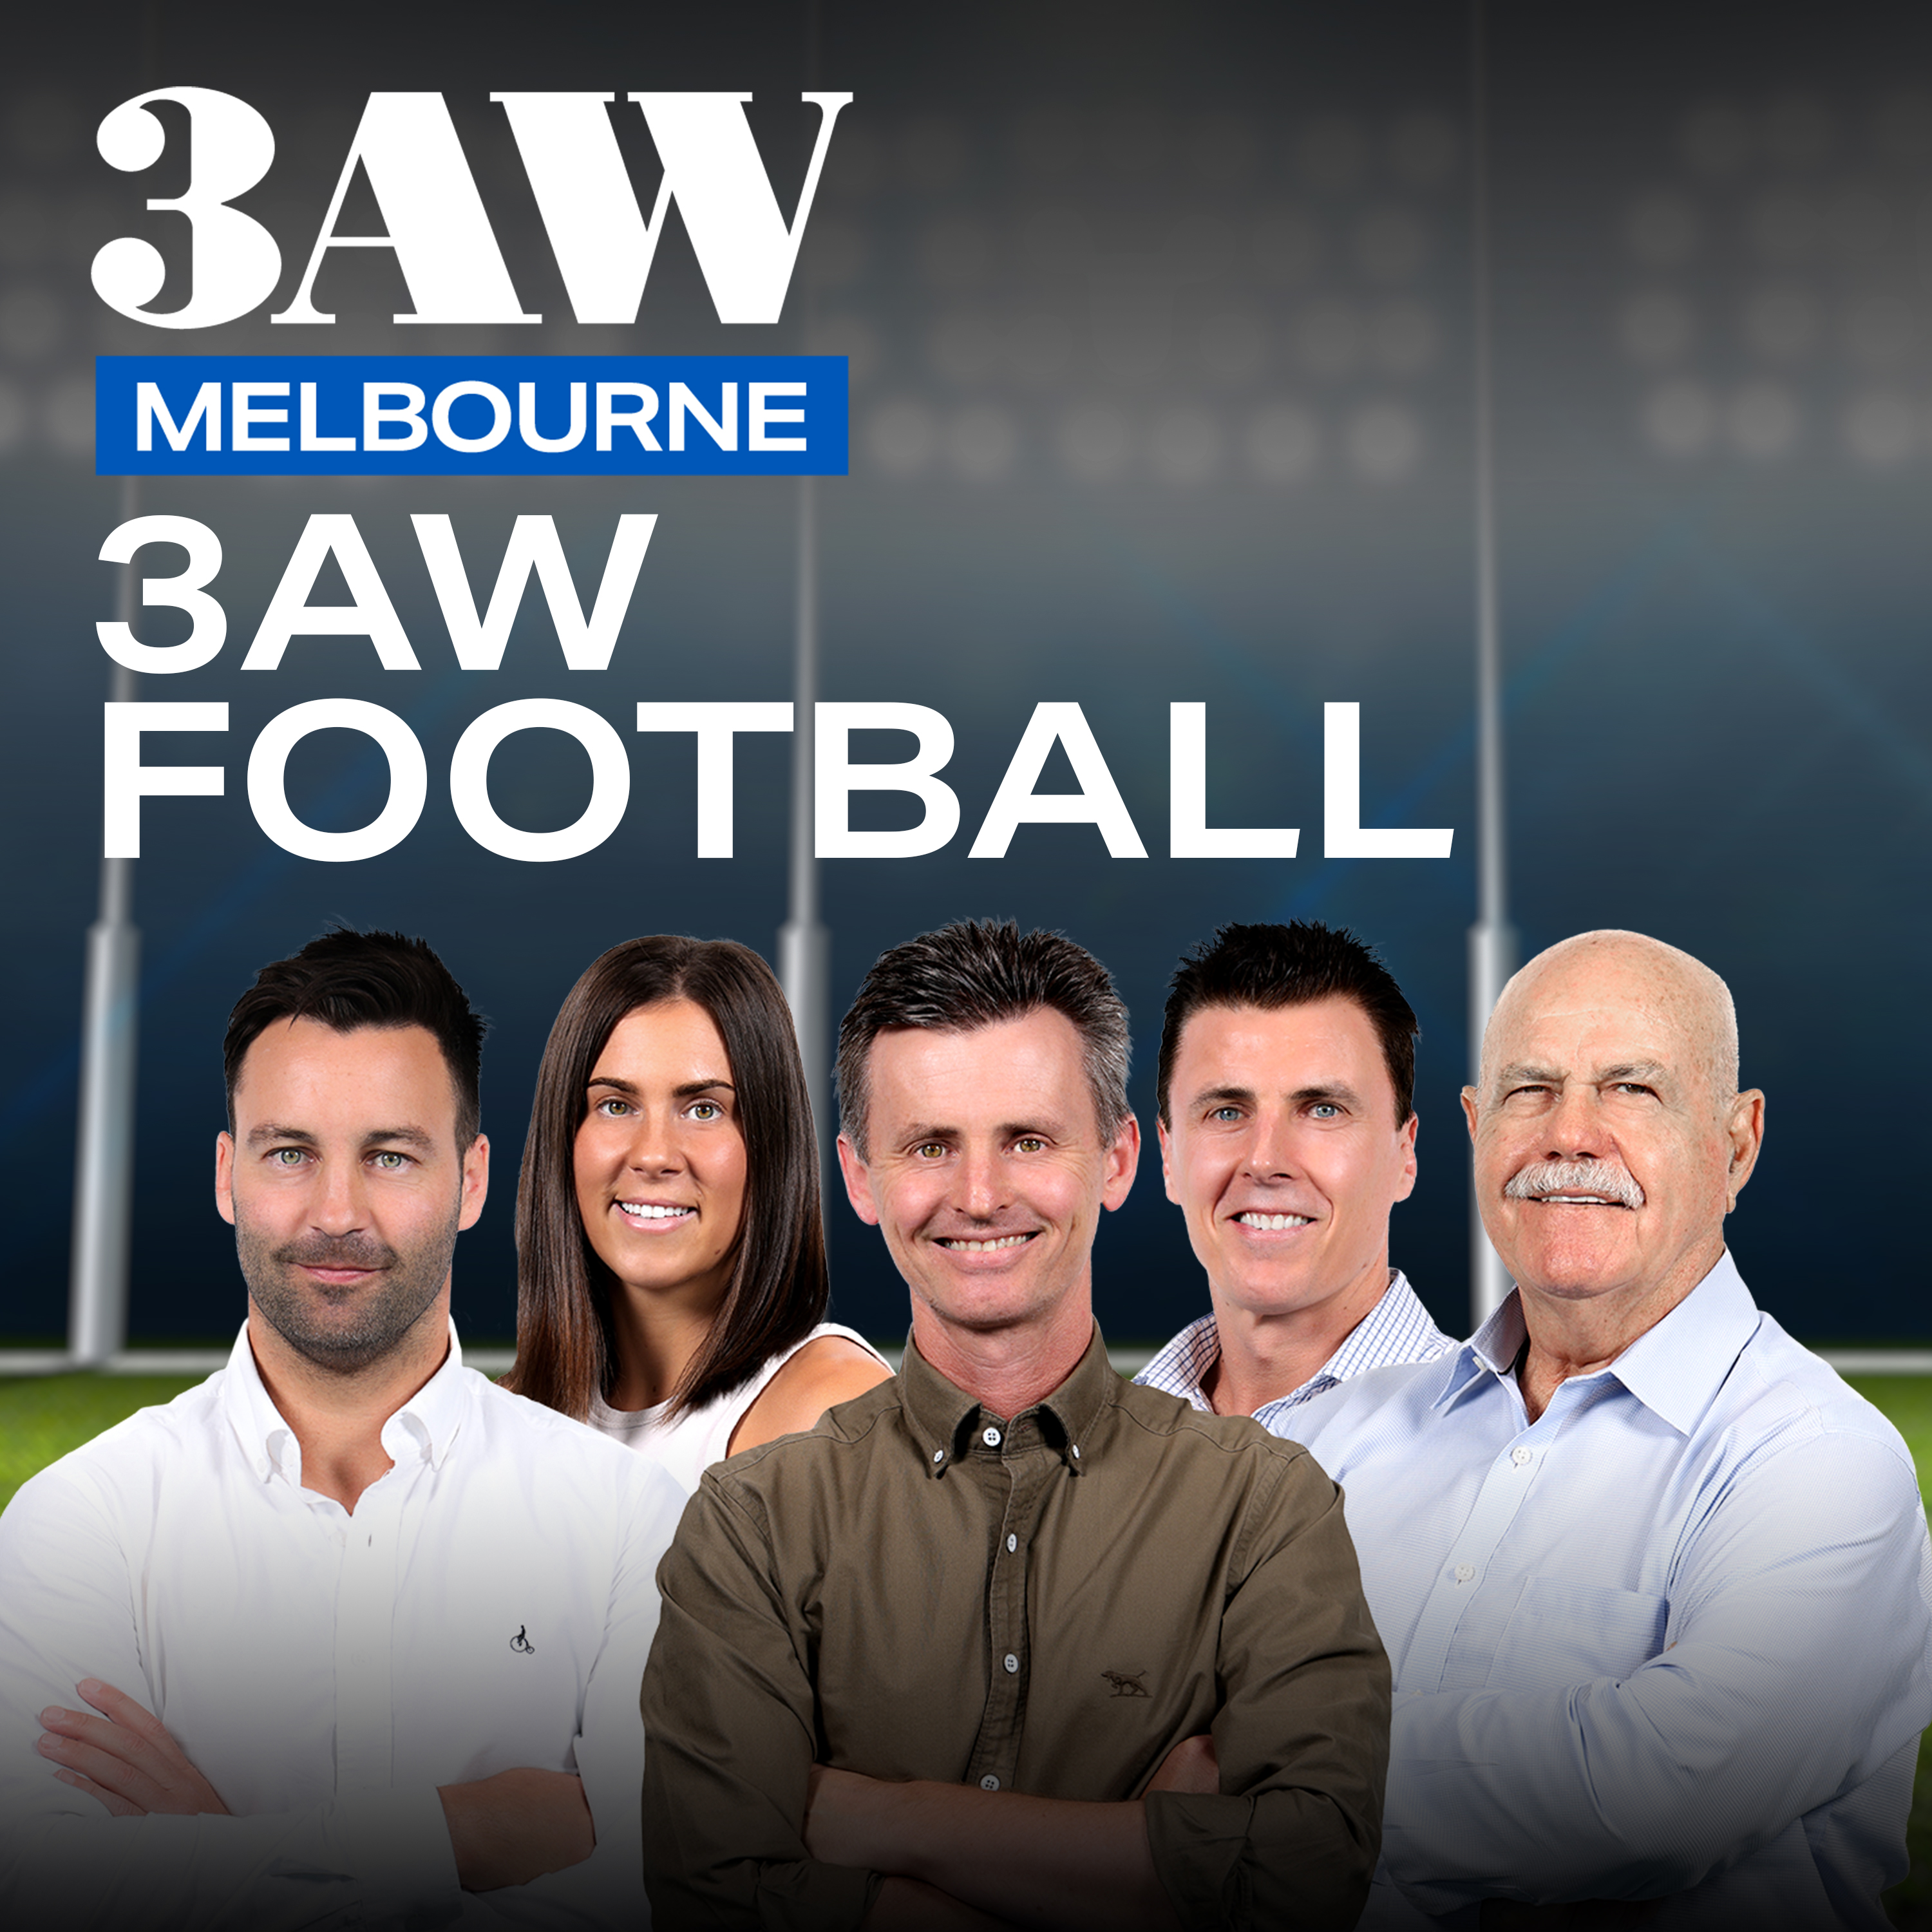 North Melbourne's Jack Ziebell joins 3AW after a massive win